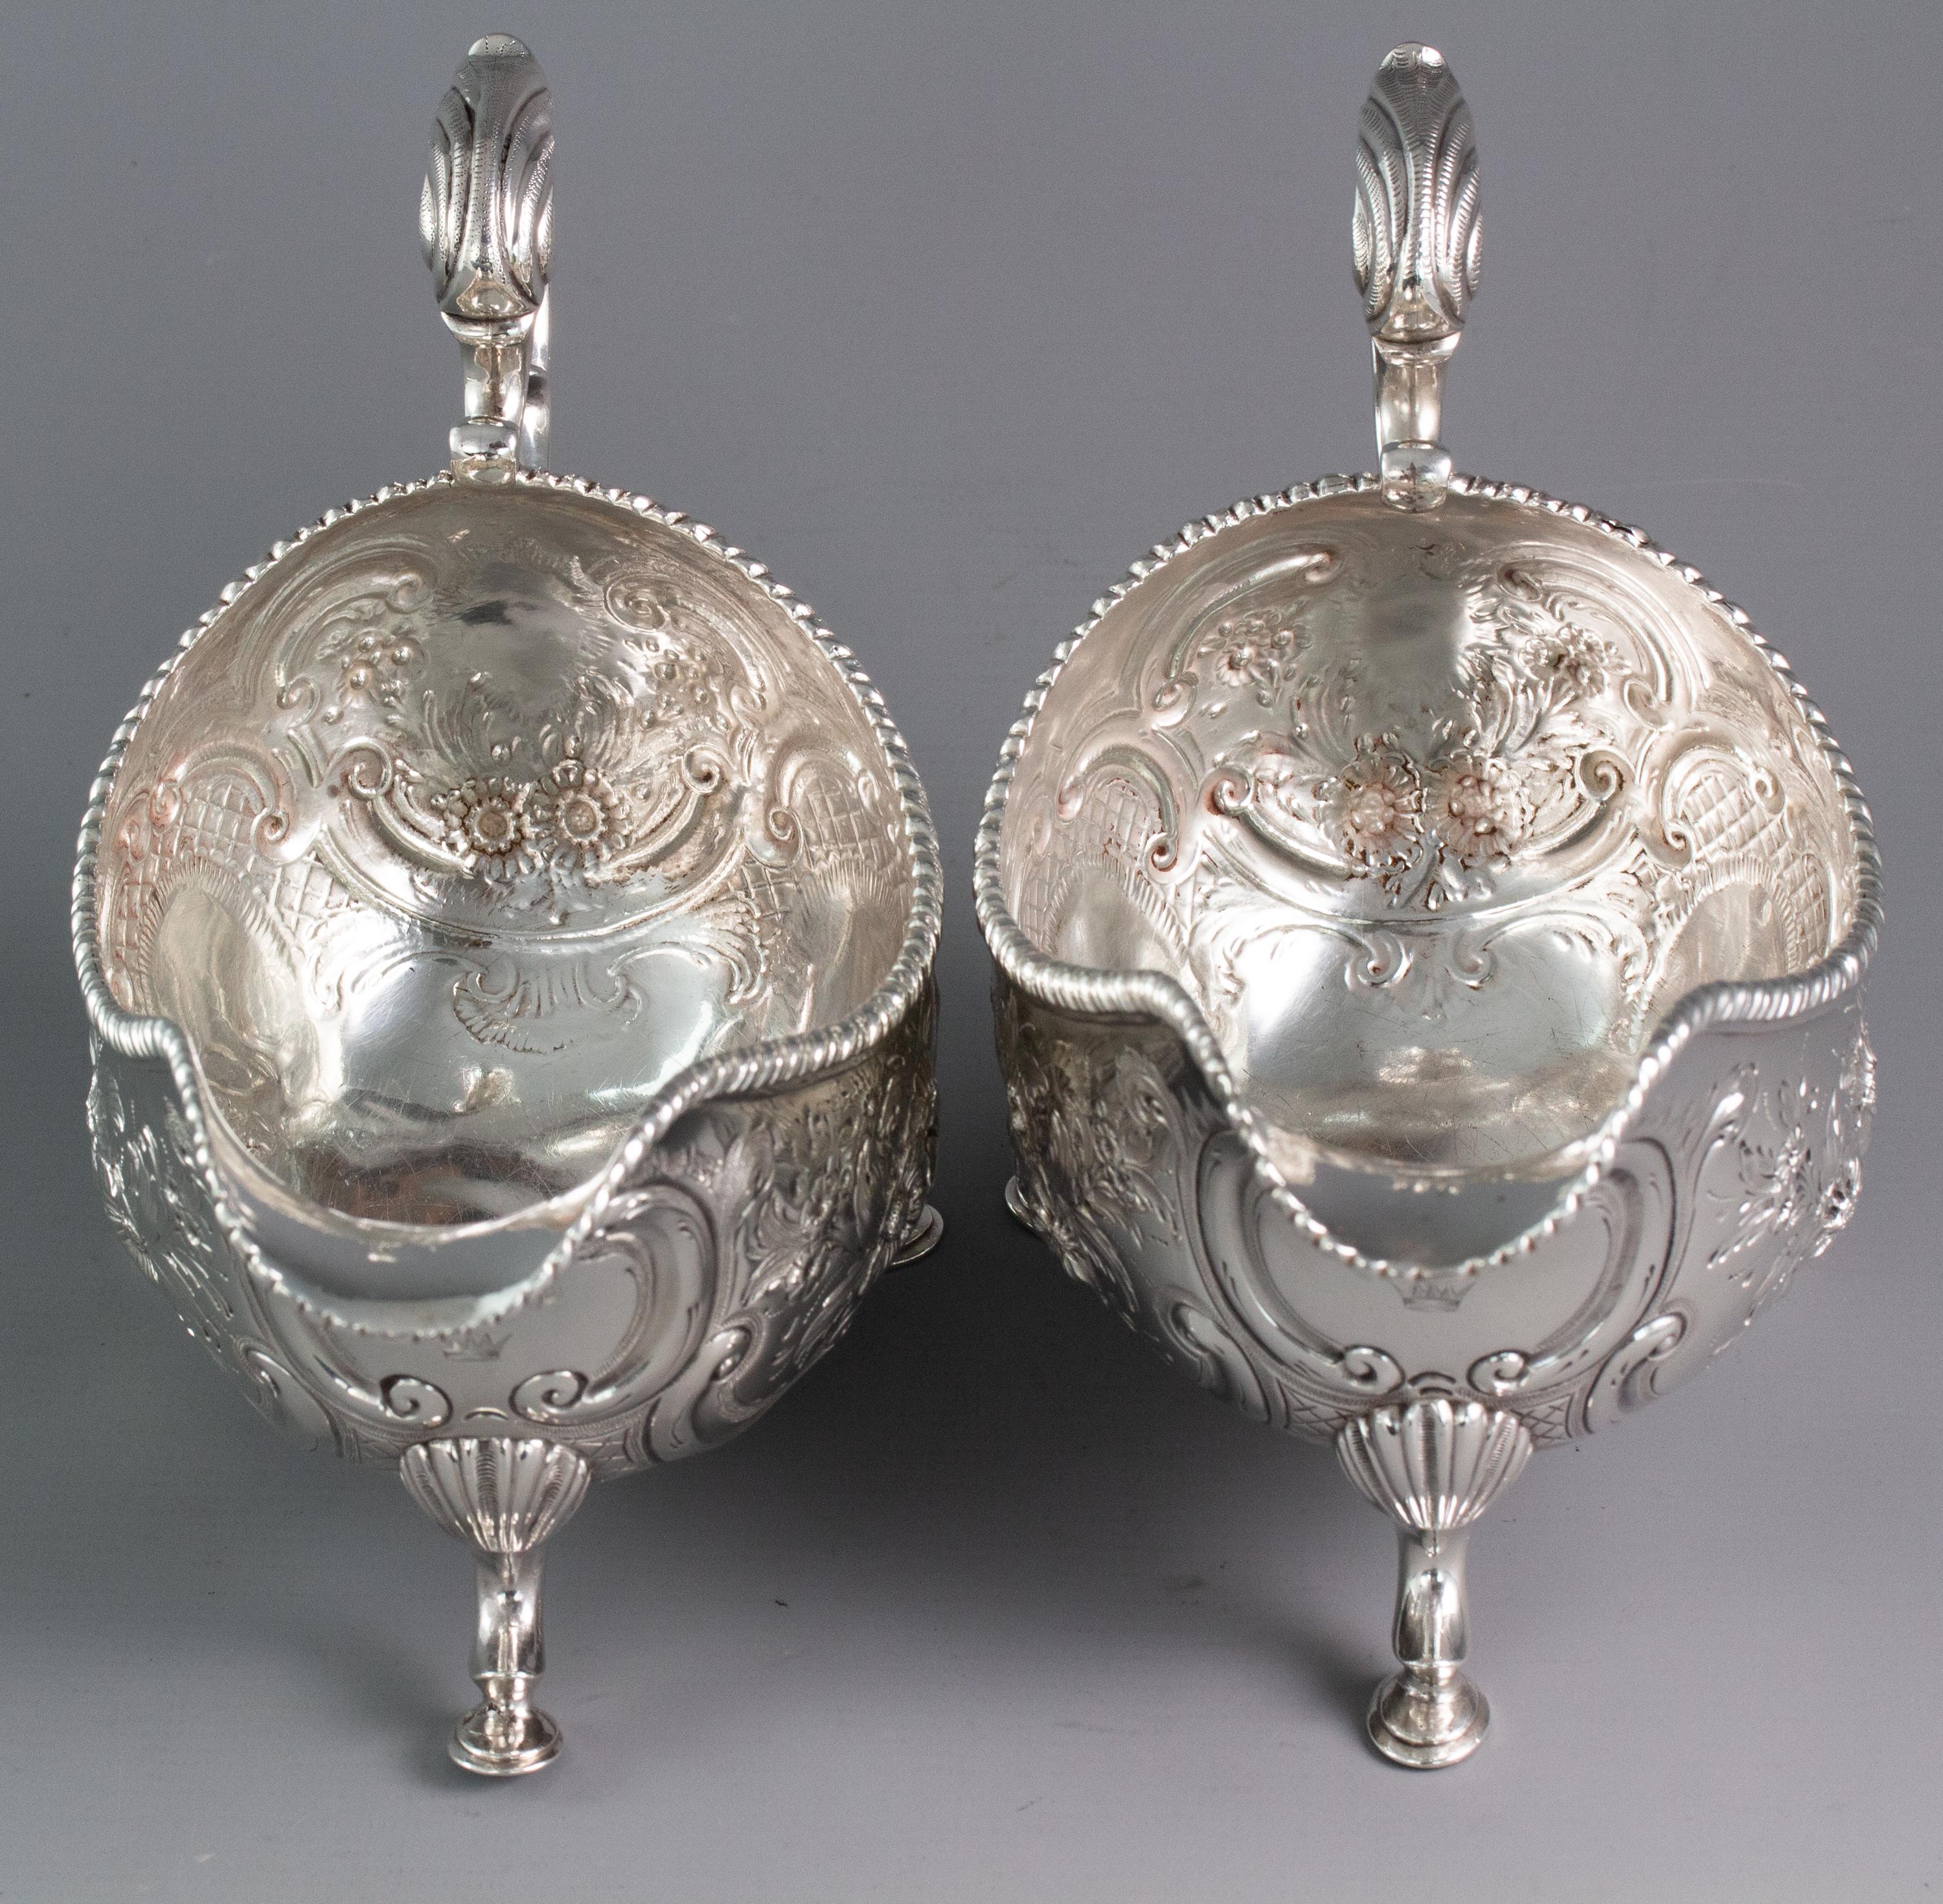 Rare Pair of Irish Silver Sauce Boats Dublin 1772 by Richard Williams For Sale 6